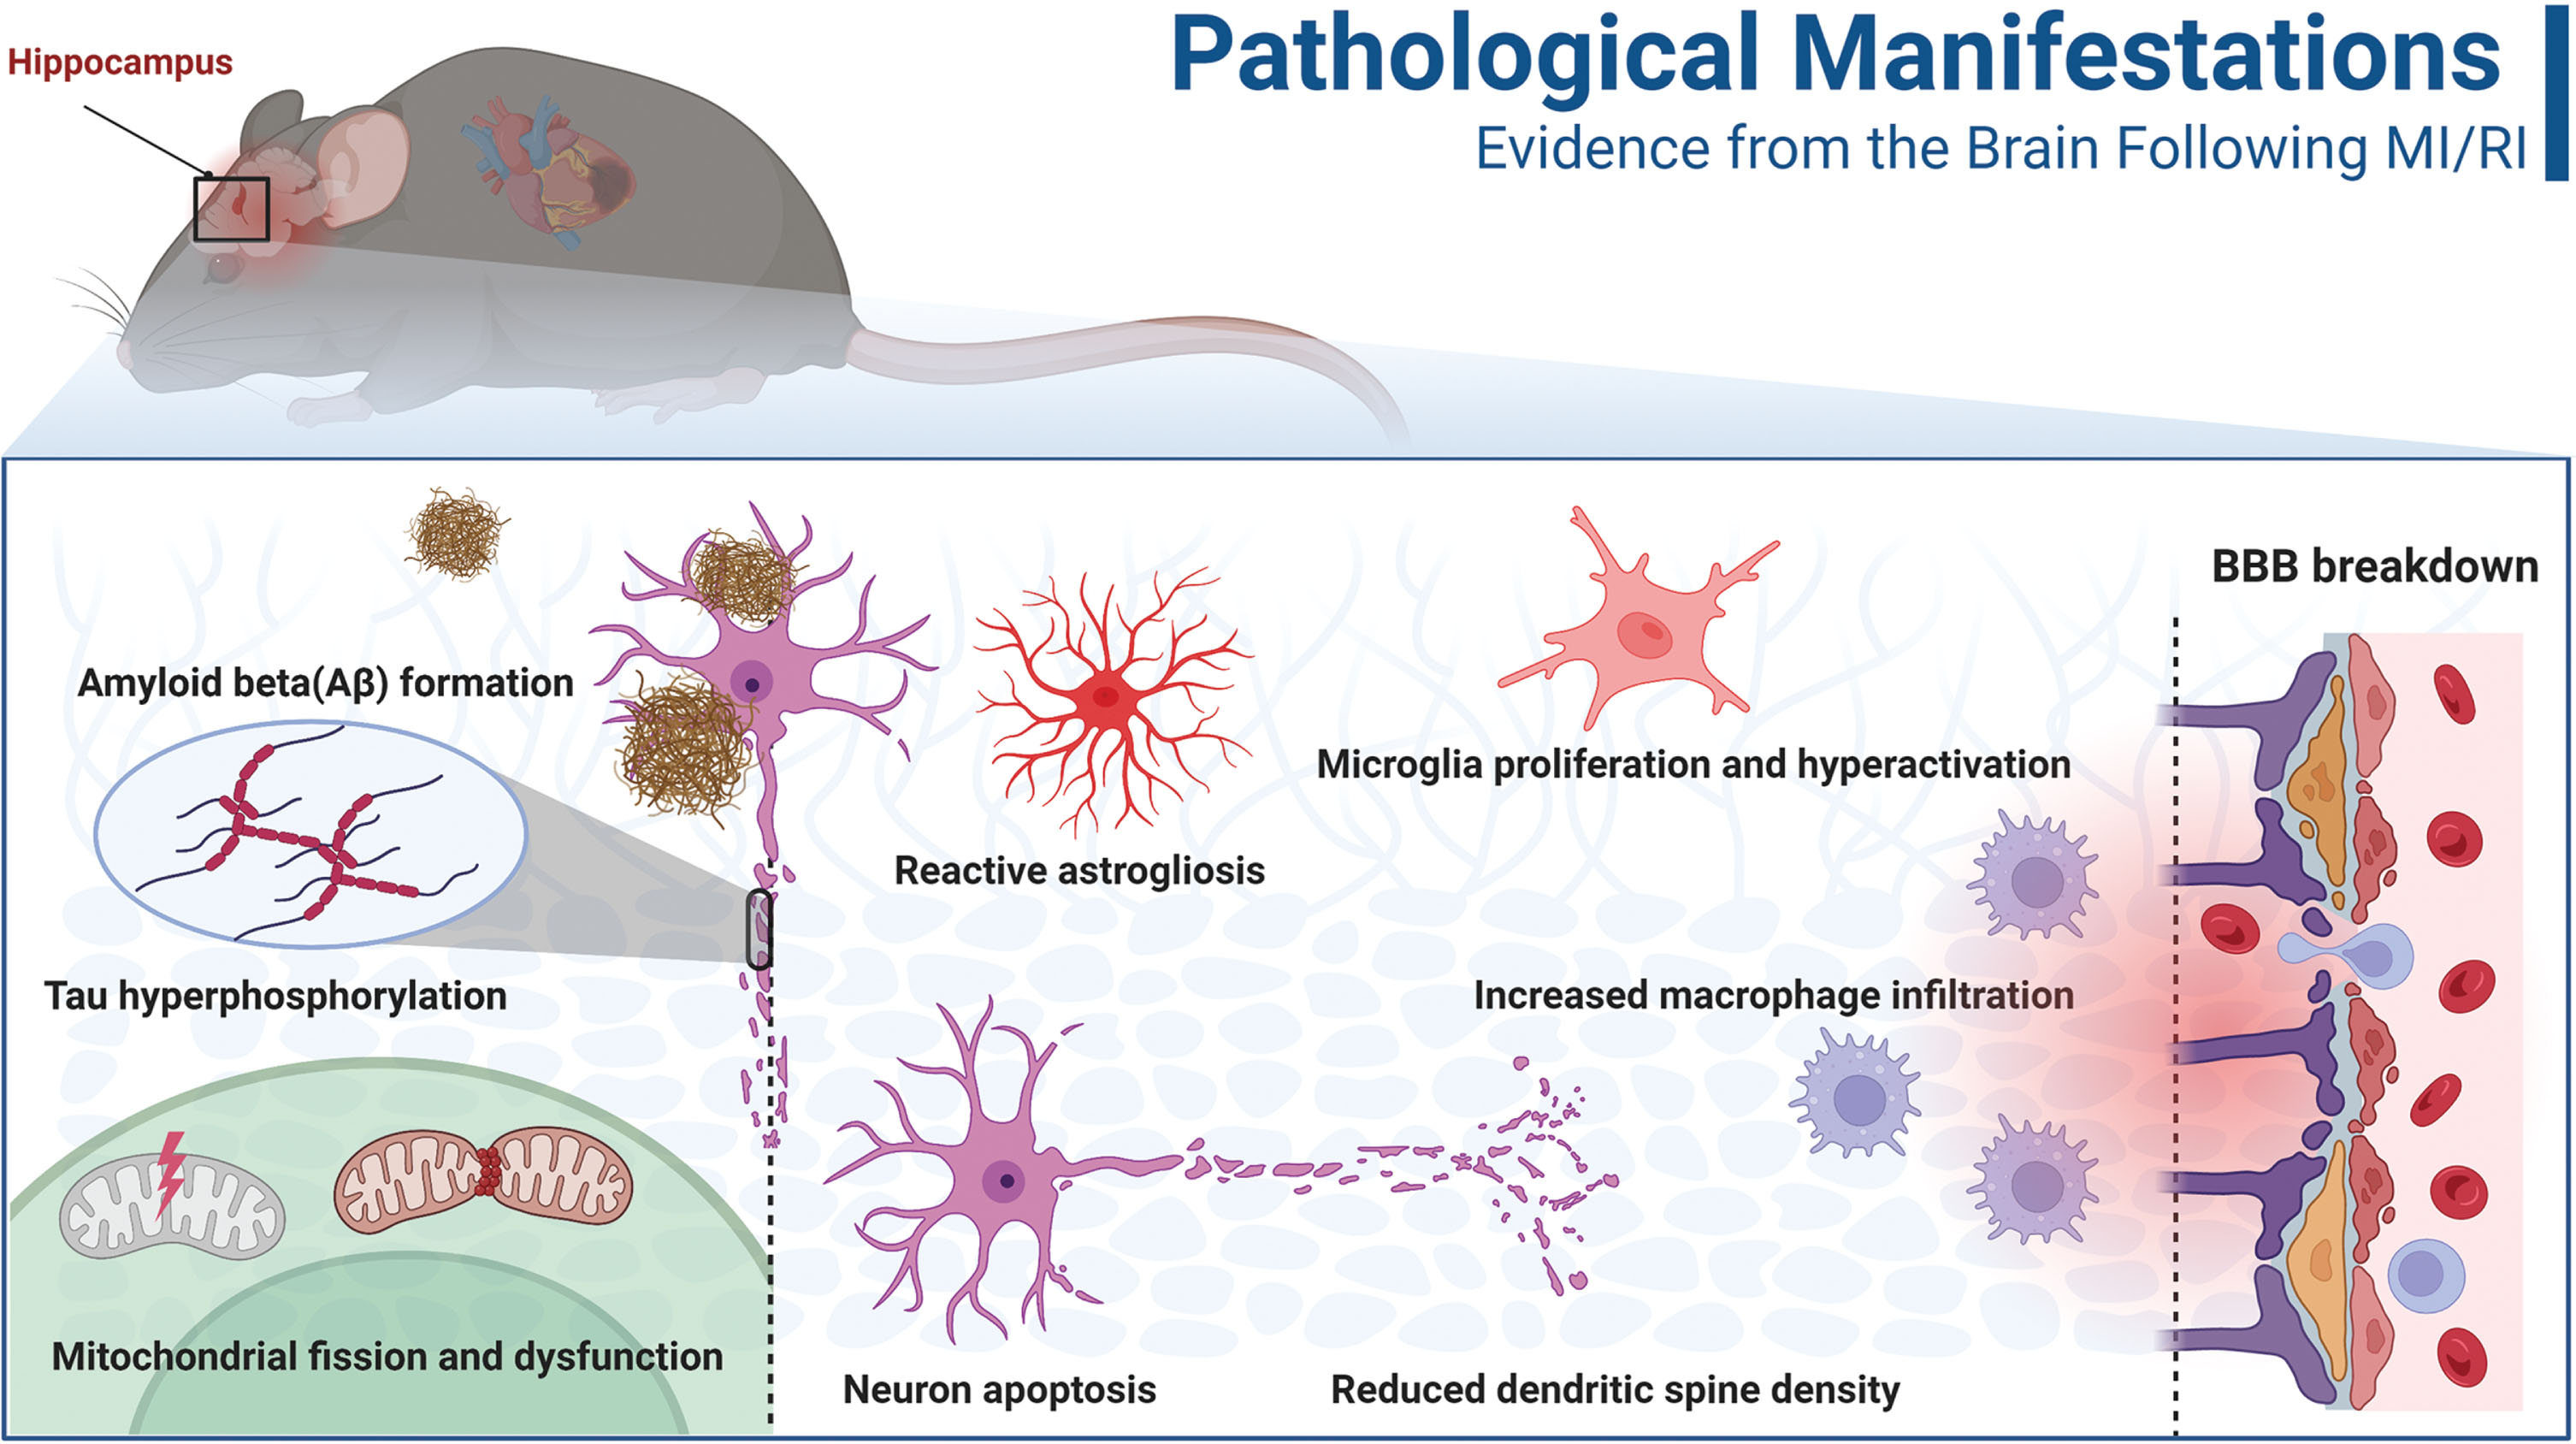 Pathological manifestations of the brain after MI/RI. At the subcellular level, mitochondrial fusion and mitochondrial dysfunction, amyloid-β (Aβ) formation and tau hyperphosphorylation occur after MI/RI (left part of the figure). At the cellular level, astrocyte activation, microglia activation, overproliferation, neuronal apoptosis combined with dendritic spine damage, and increased macrophage infiltration were observed after MI/R I (middle of the figure). At the tissue level (right part of the figure), MI/RI caused damage to the blood-brain barrier (BBB). MI/RI, Myocardial ischemia/reperfusion injury.